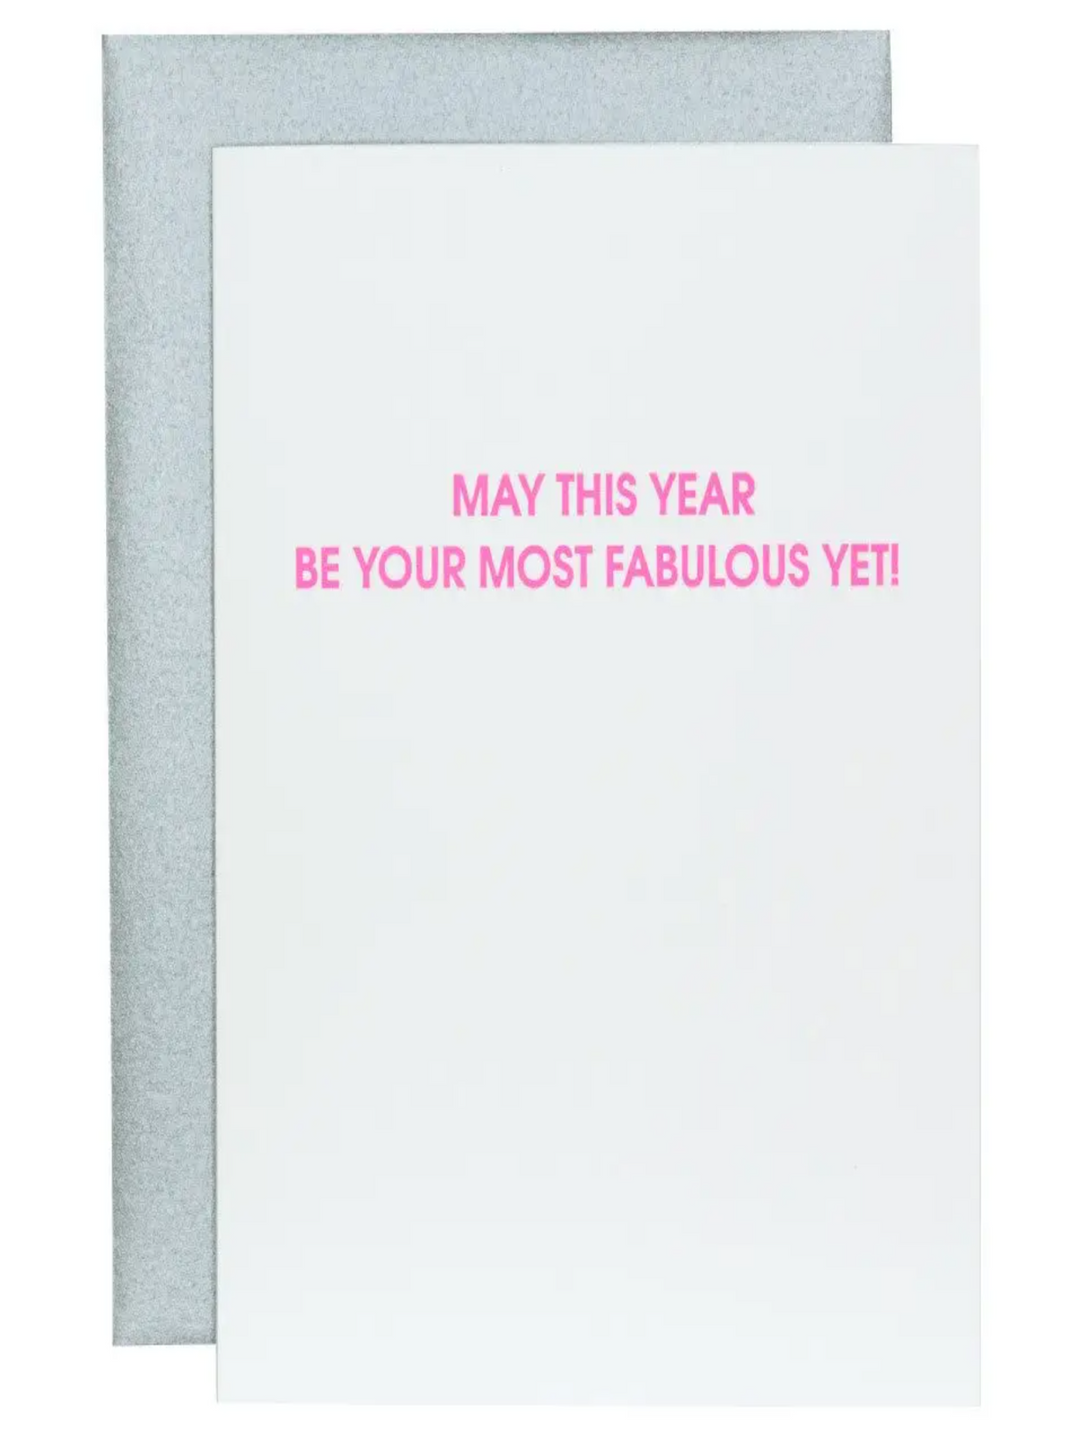 Greeting Card, May This Year Be Your Most Fabulous Yet!